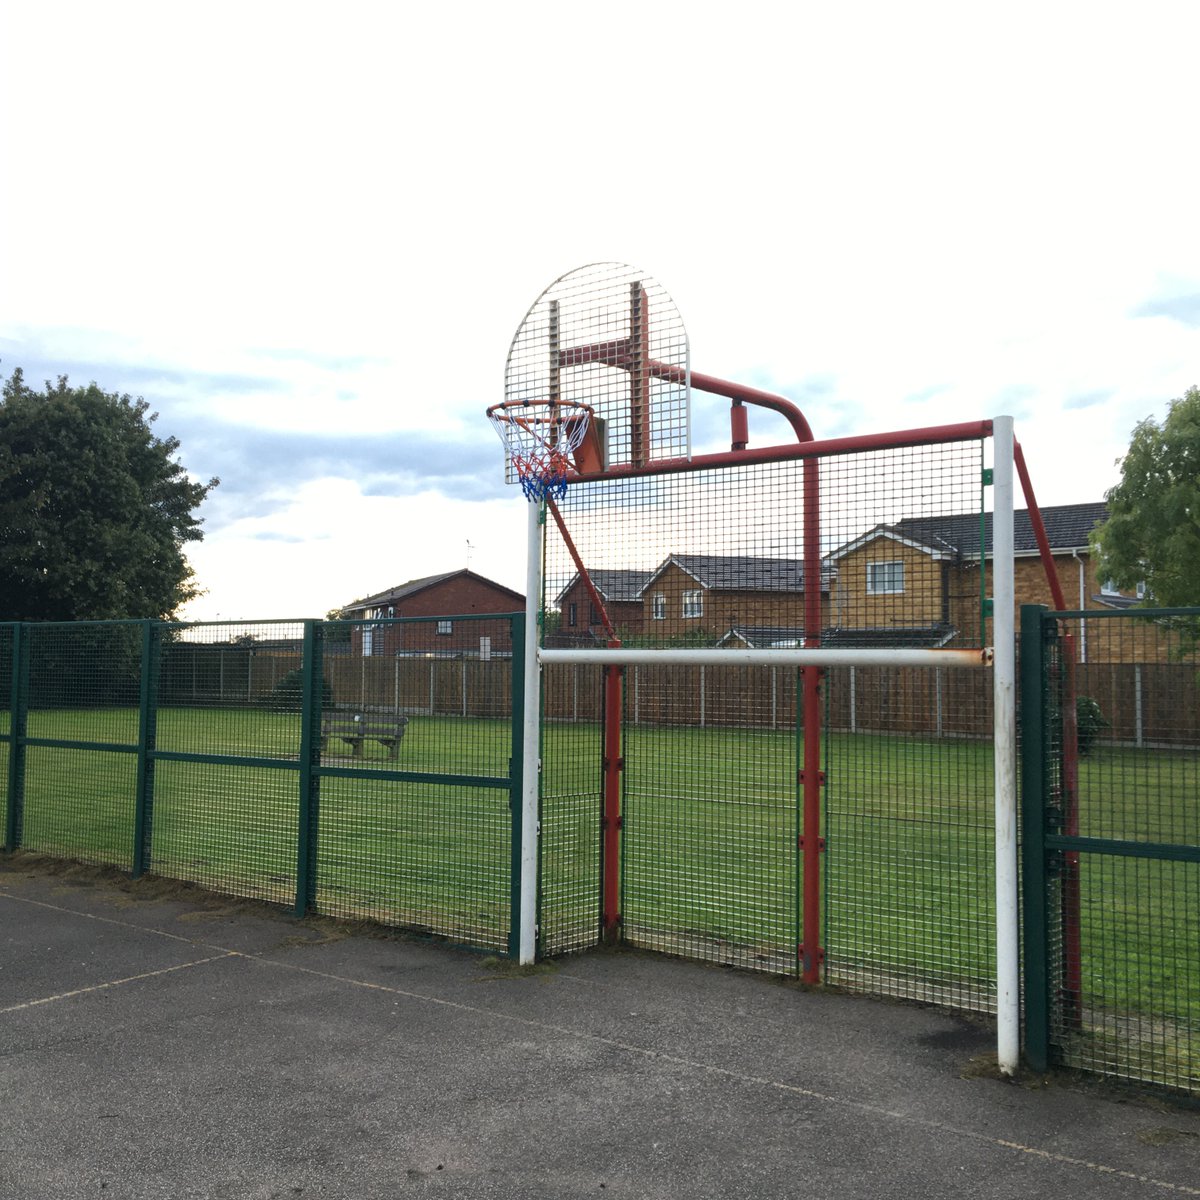 More new nets!!! We've hung nets on;
Great Yarmouth: Jellicoe Road, Cobholm Kick About Area
Gorleston: Marine Parade (2nd set this summer!)
Belton: Bell Lane Playing Field
Head out and shoot some hoops before joining us at #GYBasketball. Thanks to @bballengland #ProjectSwish 🏀